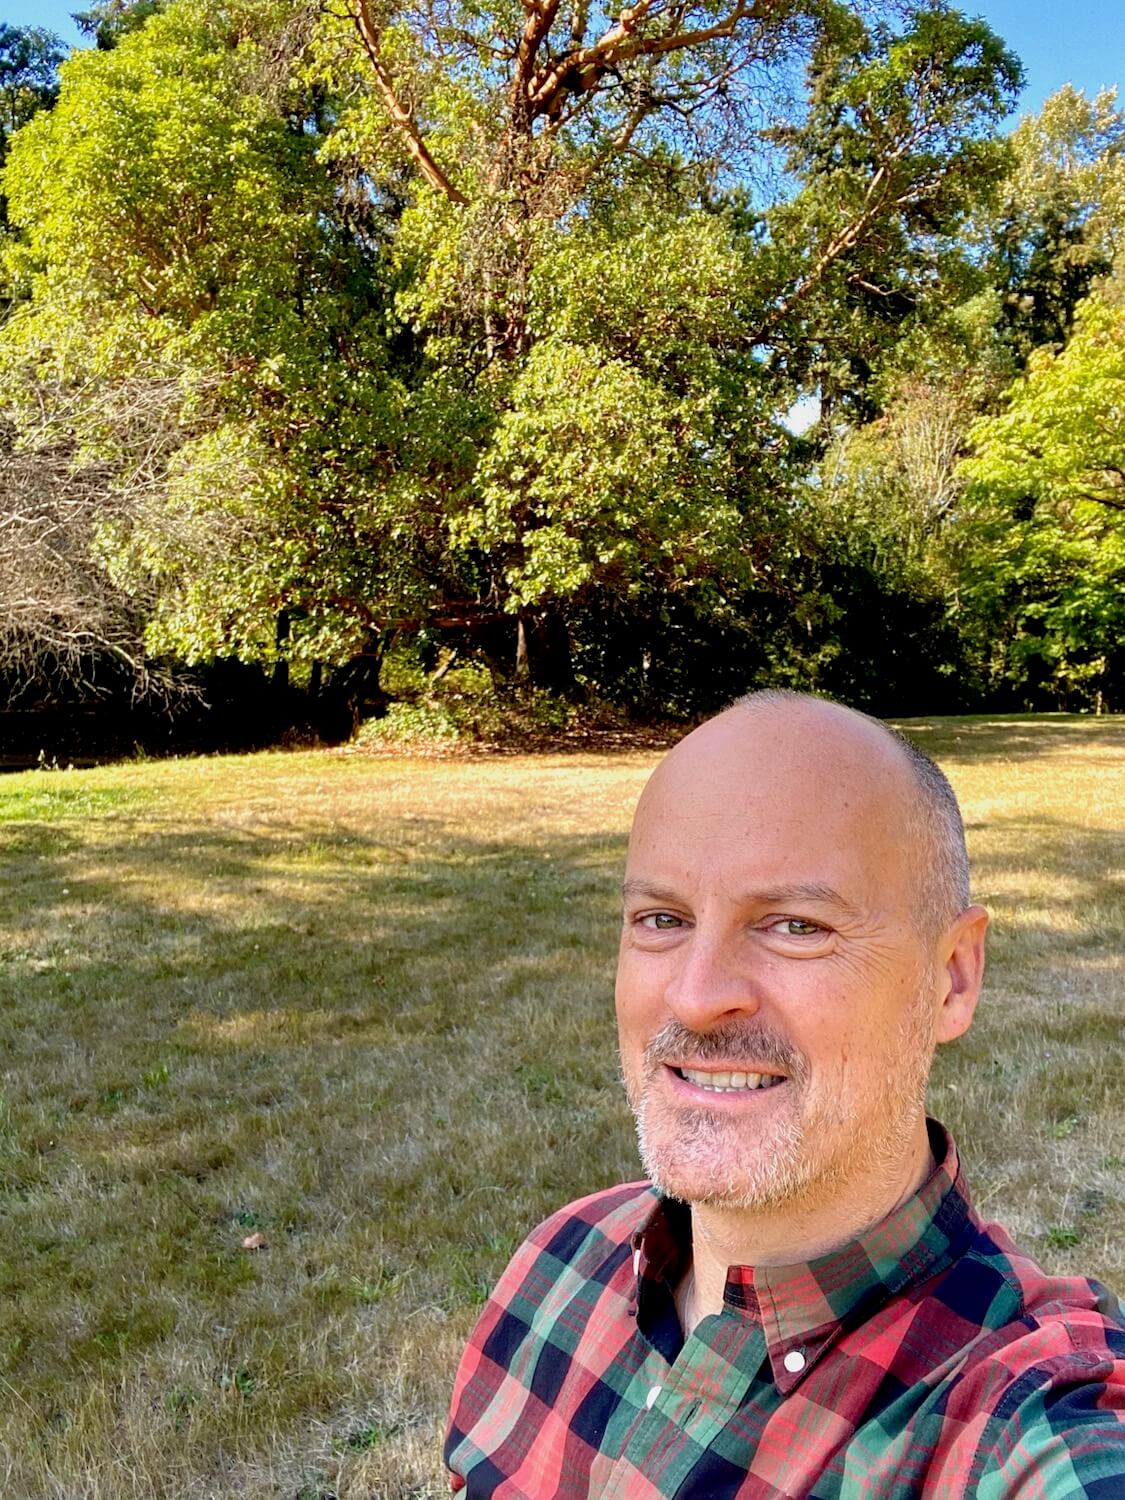 Selfie of Matthew Kessi in an open meadow in a Seattle park.  The trees in the background are full of green leaves against a blue sky and he's smiling and wearing a red, black and green checkered button up shirt.  